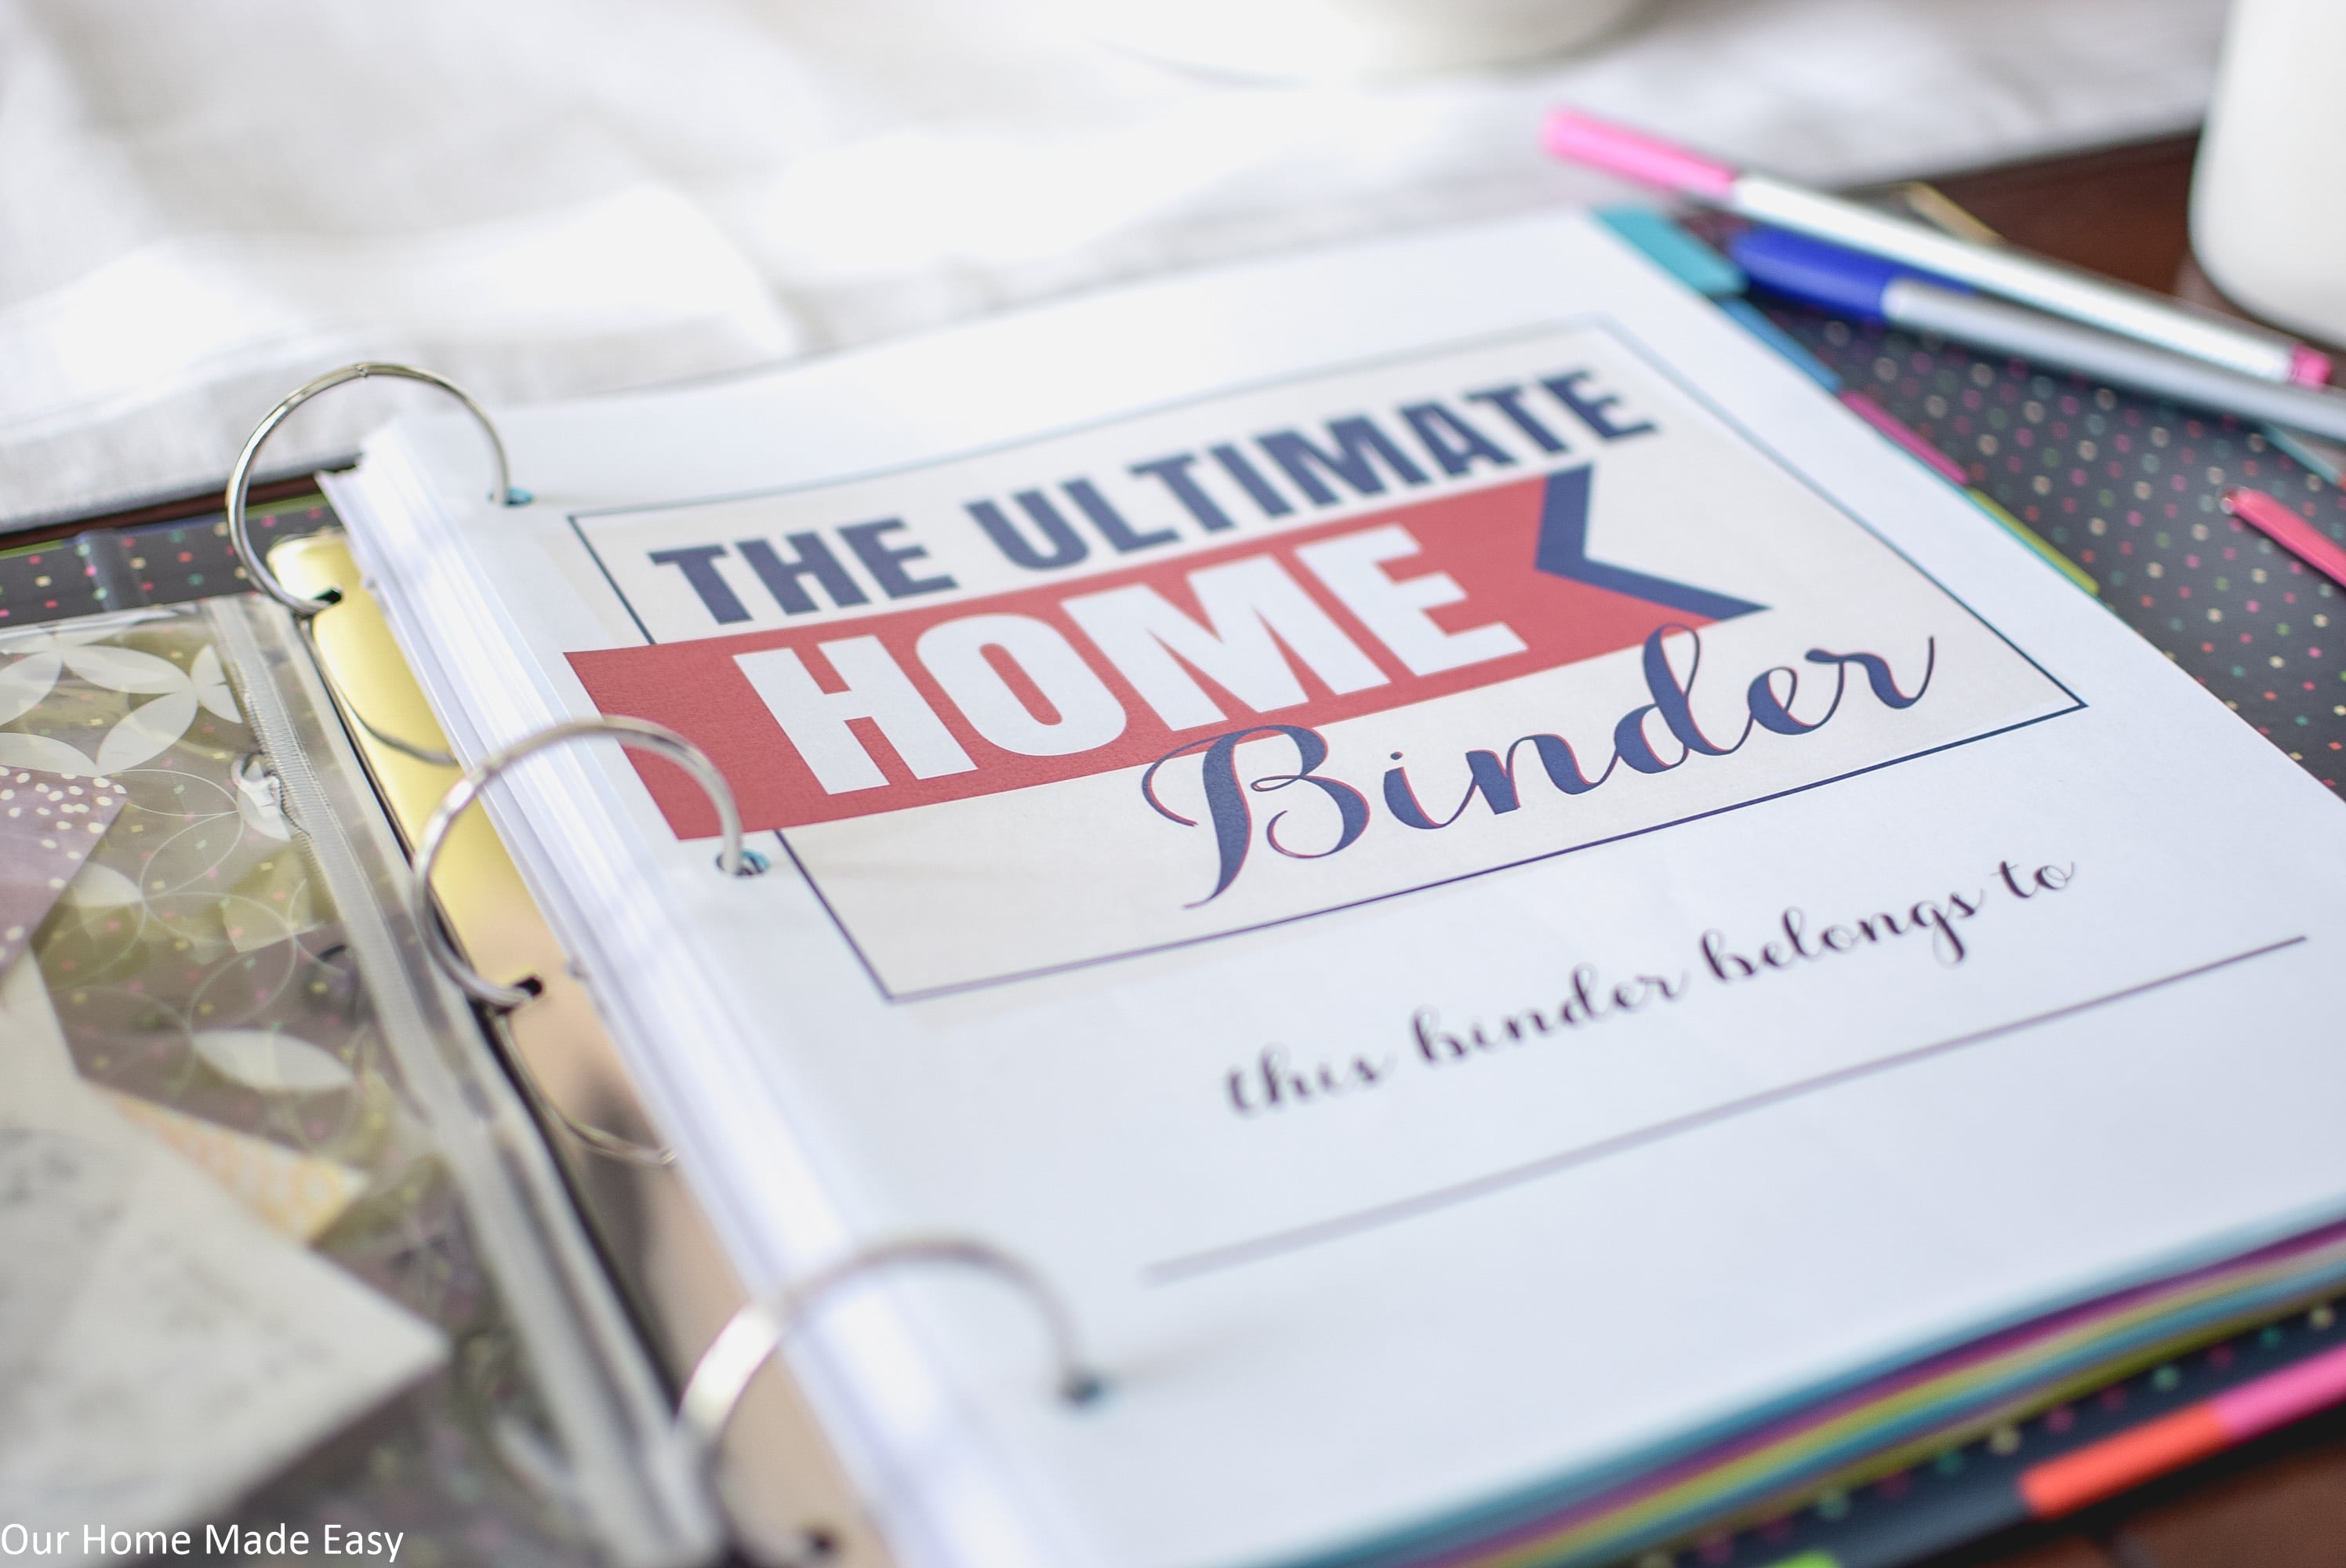 The Ultimate Home Binder is the perfect resource to get your life and your home organized